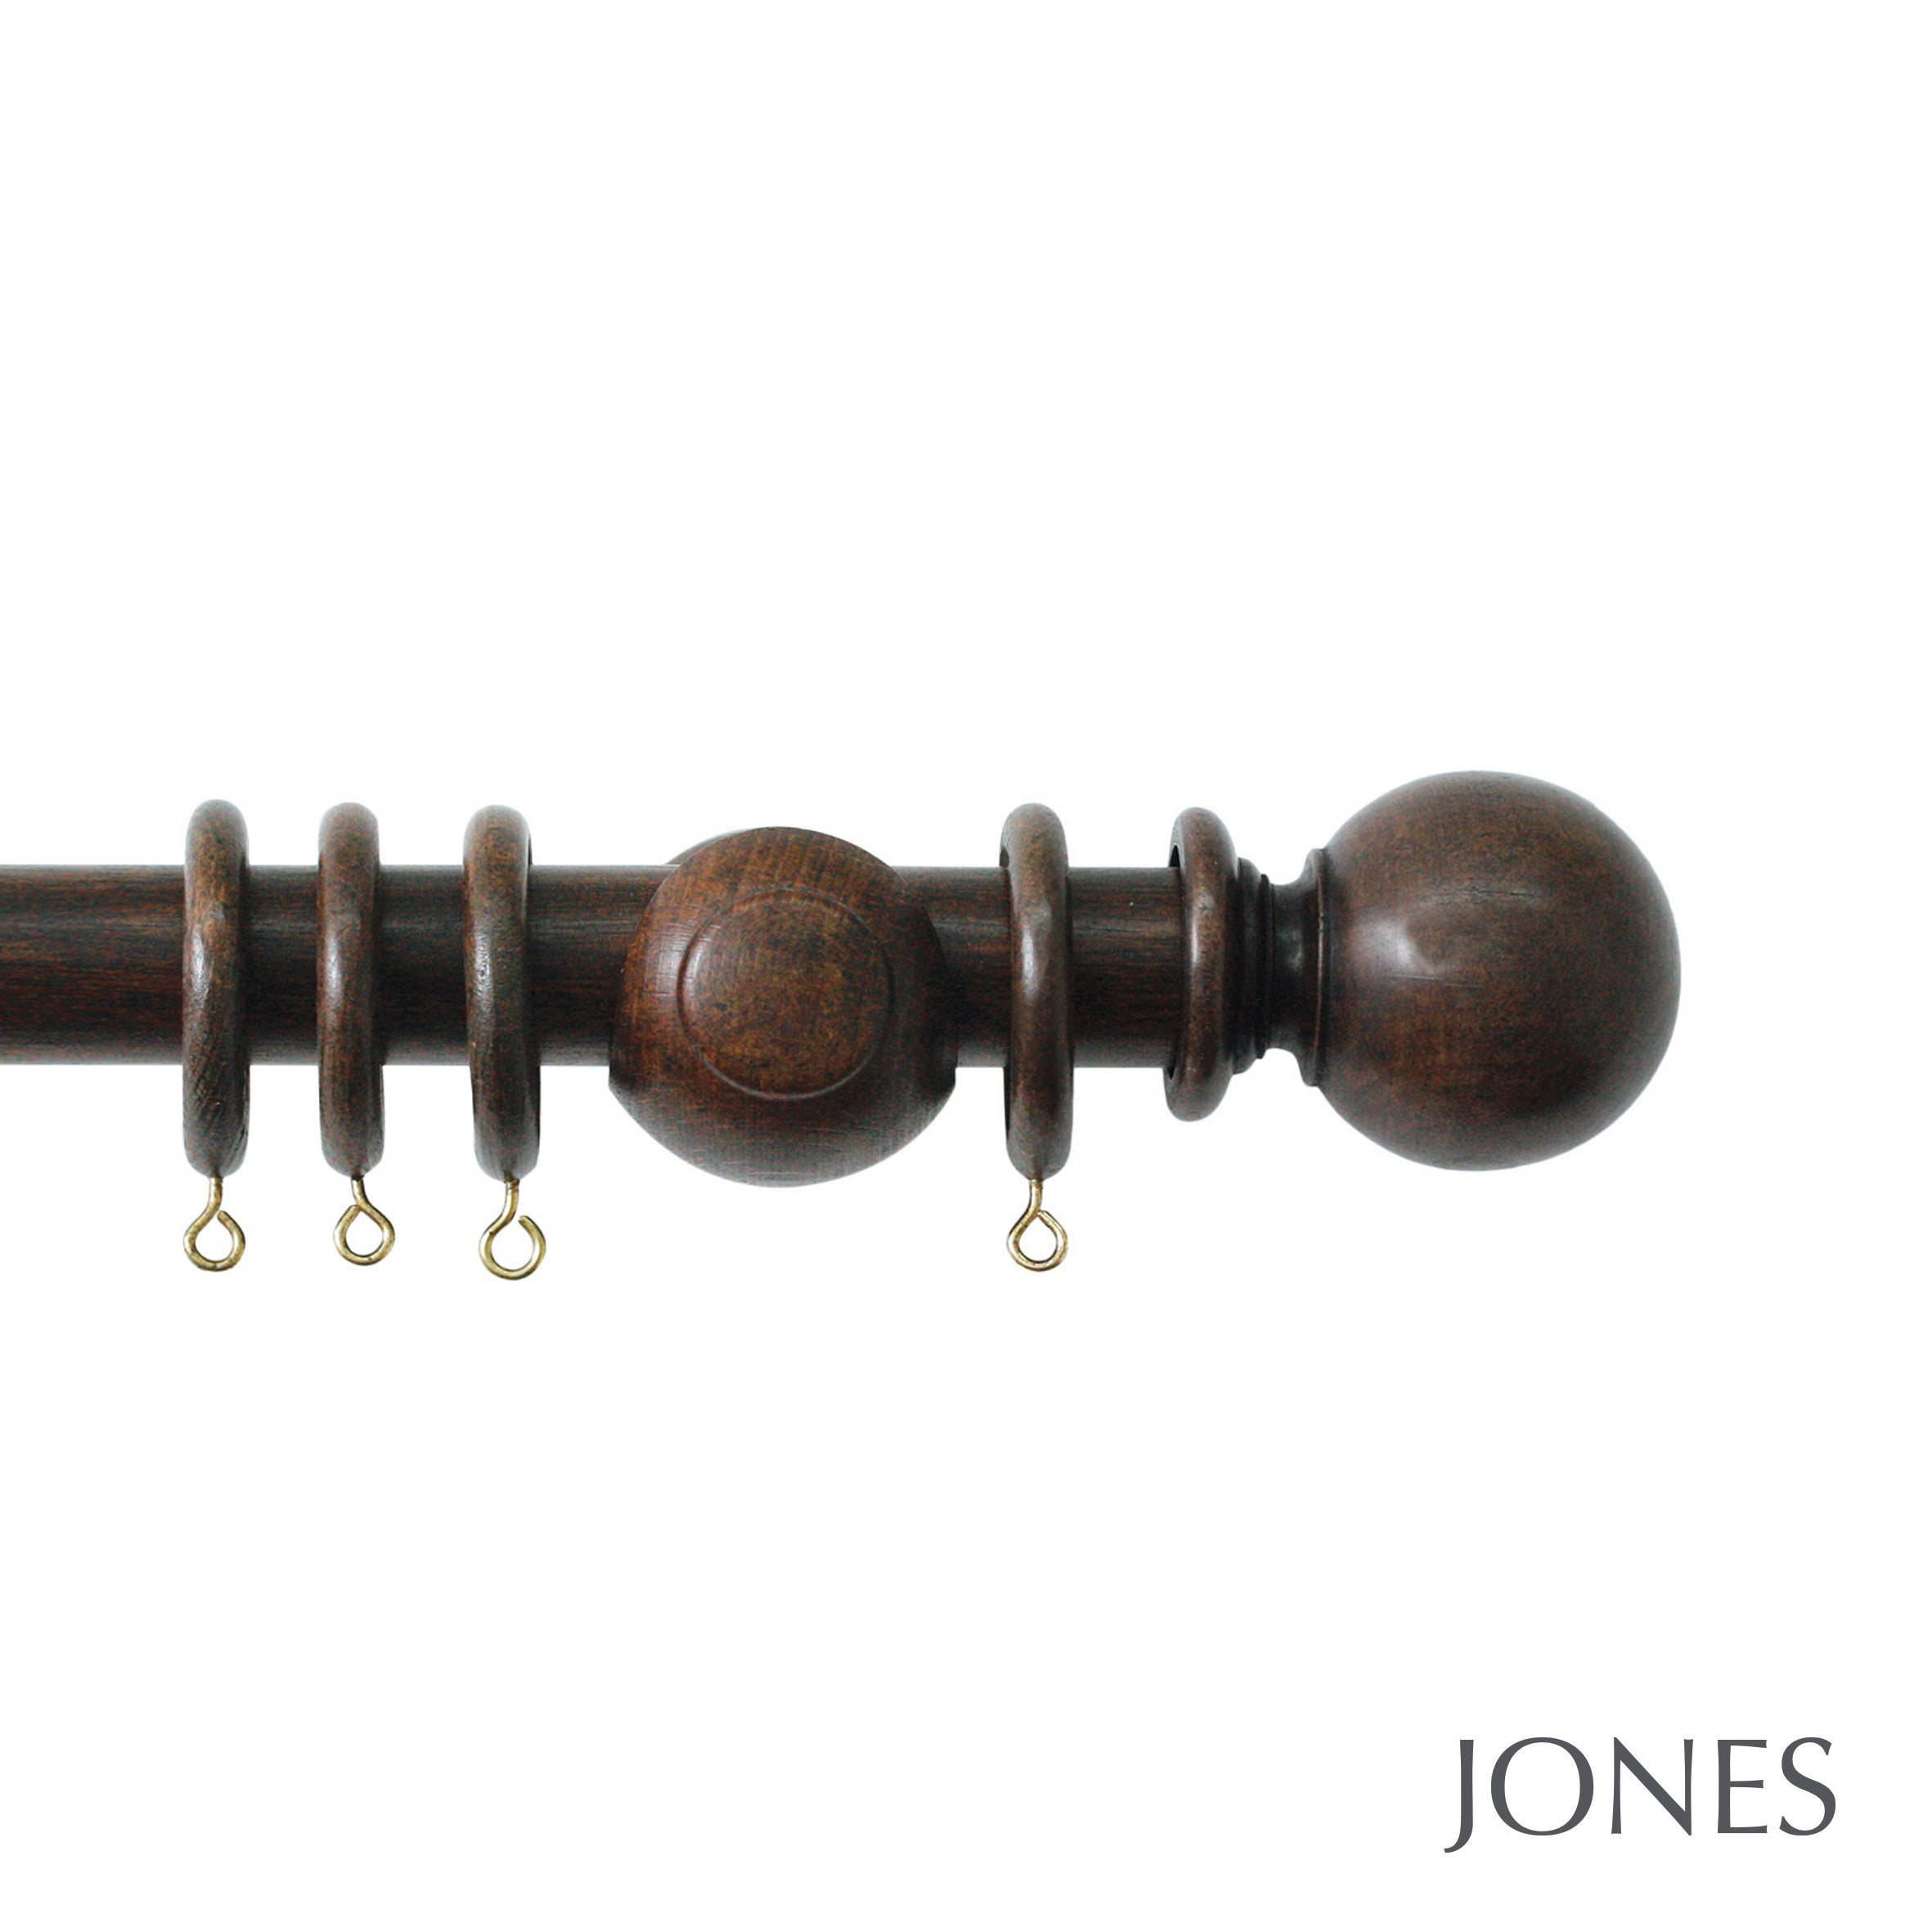 Jones Interiors Cathedral Ball Finial Curtain Pole Set in Oak